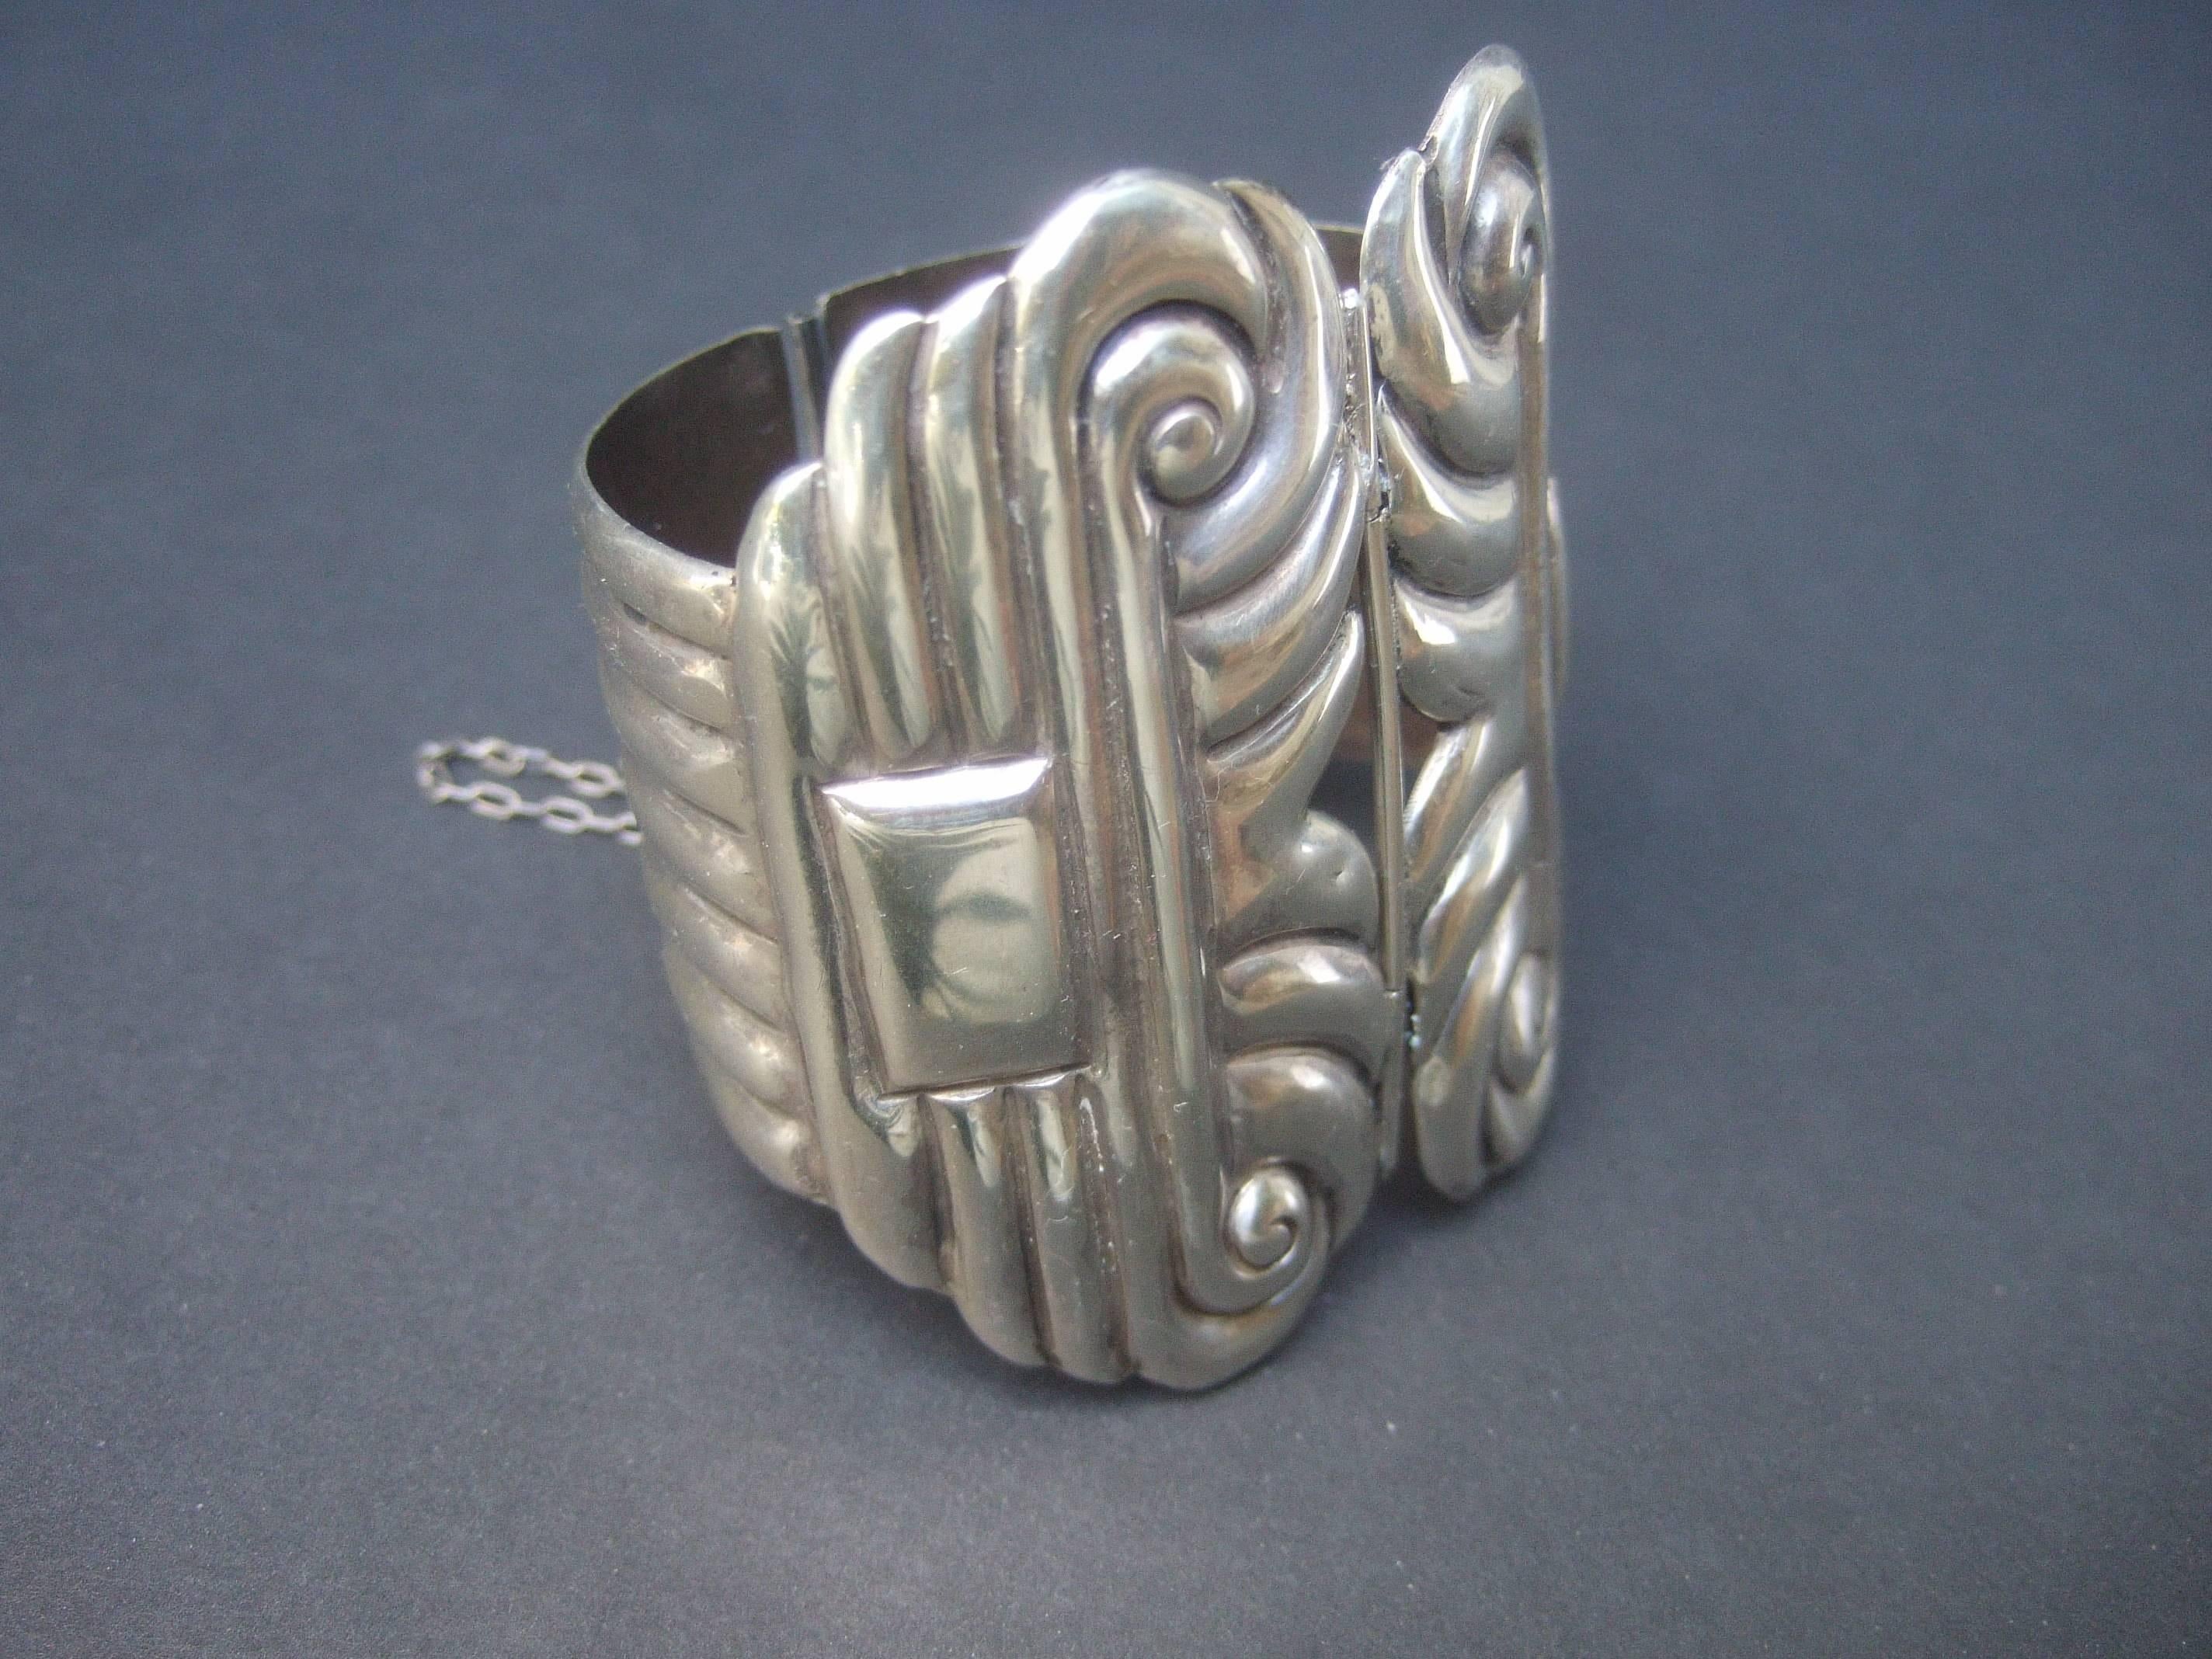 Mexican Sterling Massive Hinged Artisan Cuff Bracelet c 1940s 1